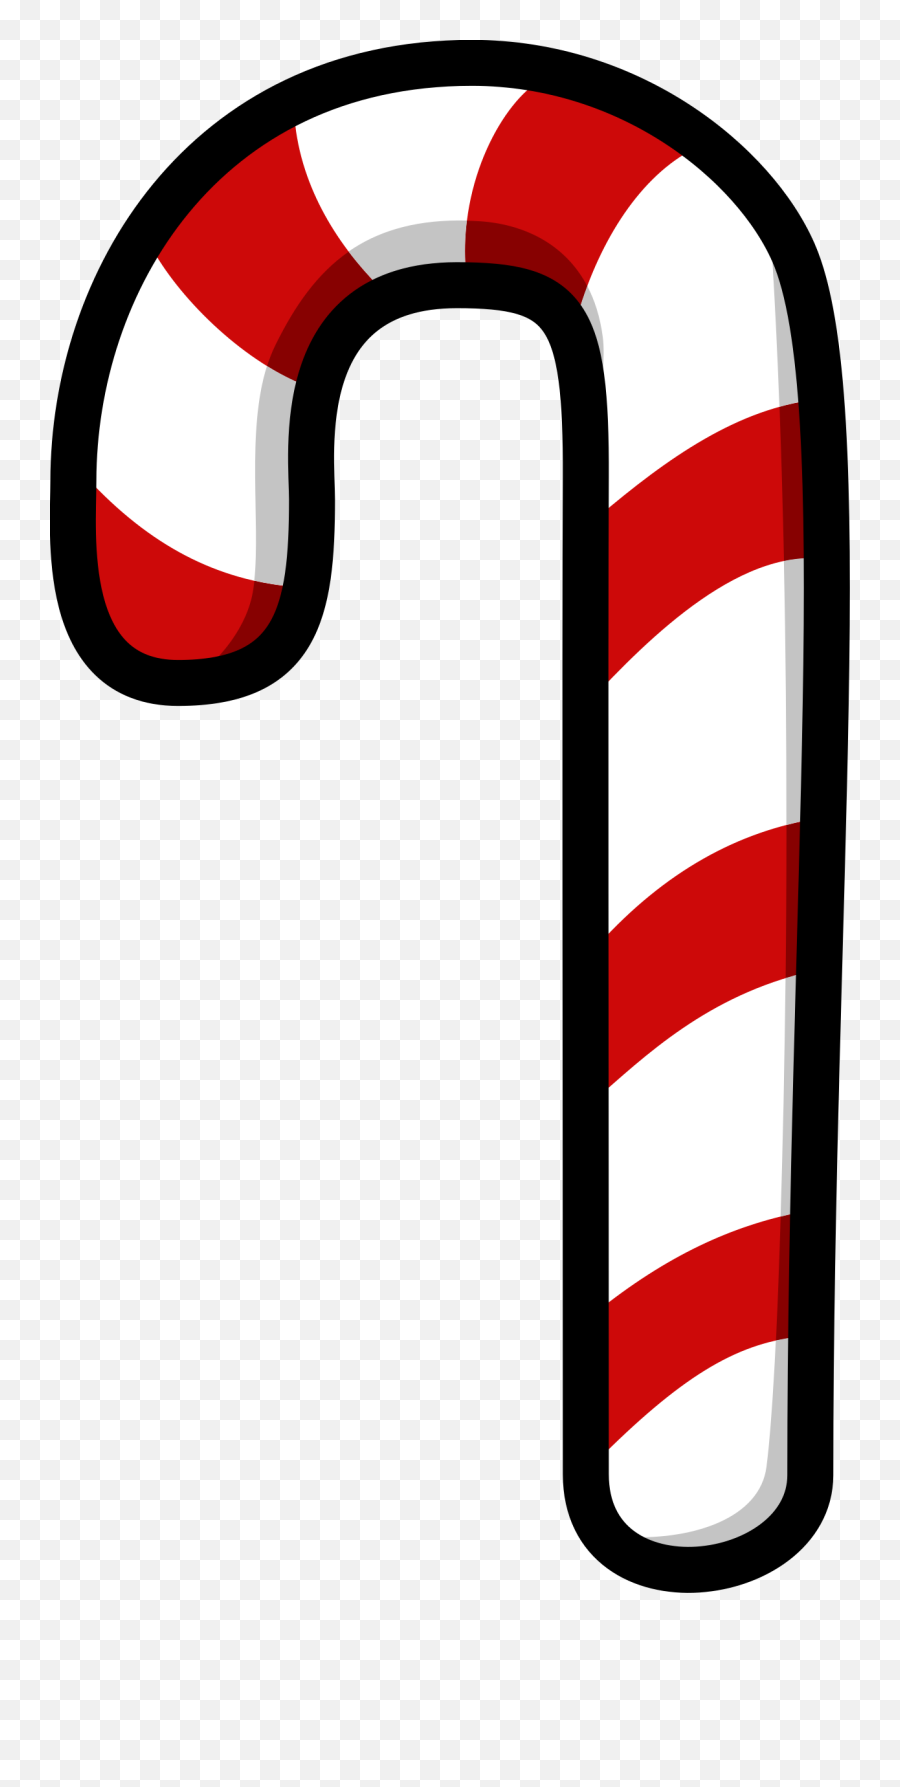 Candy Free To Use Cliparts Recipes Homemade - Christmas Clipart Candy Canes Png,Candy Clipart Png